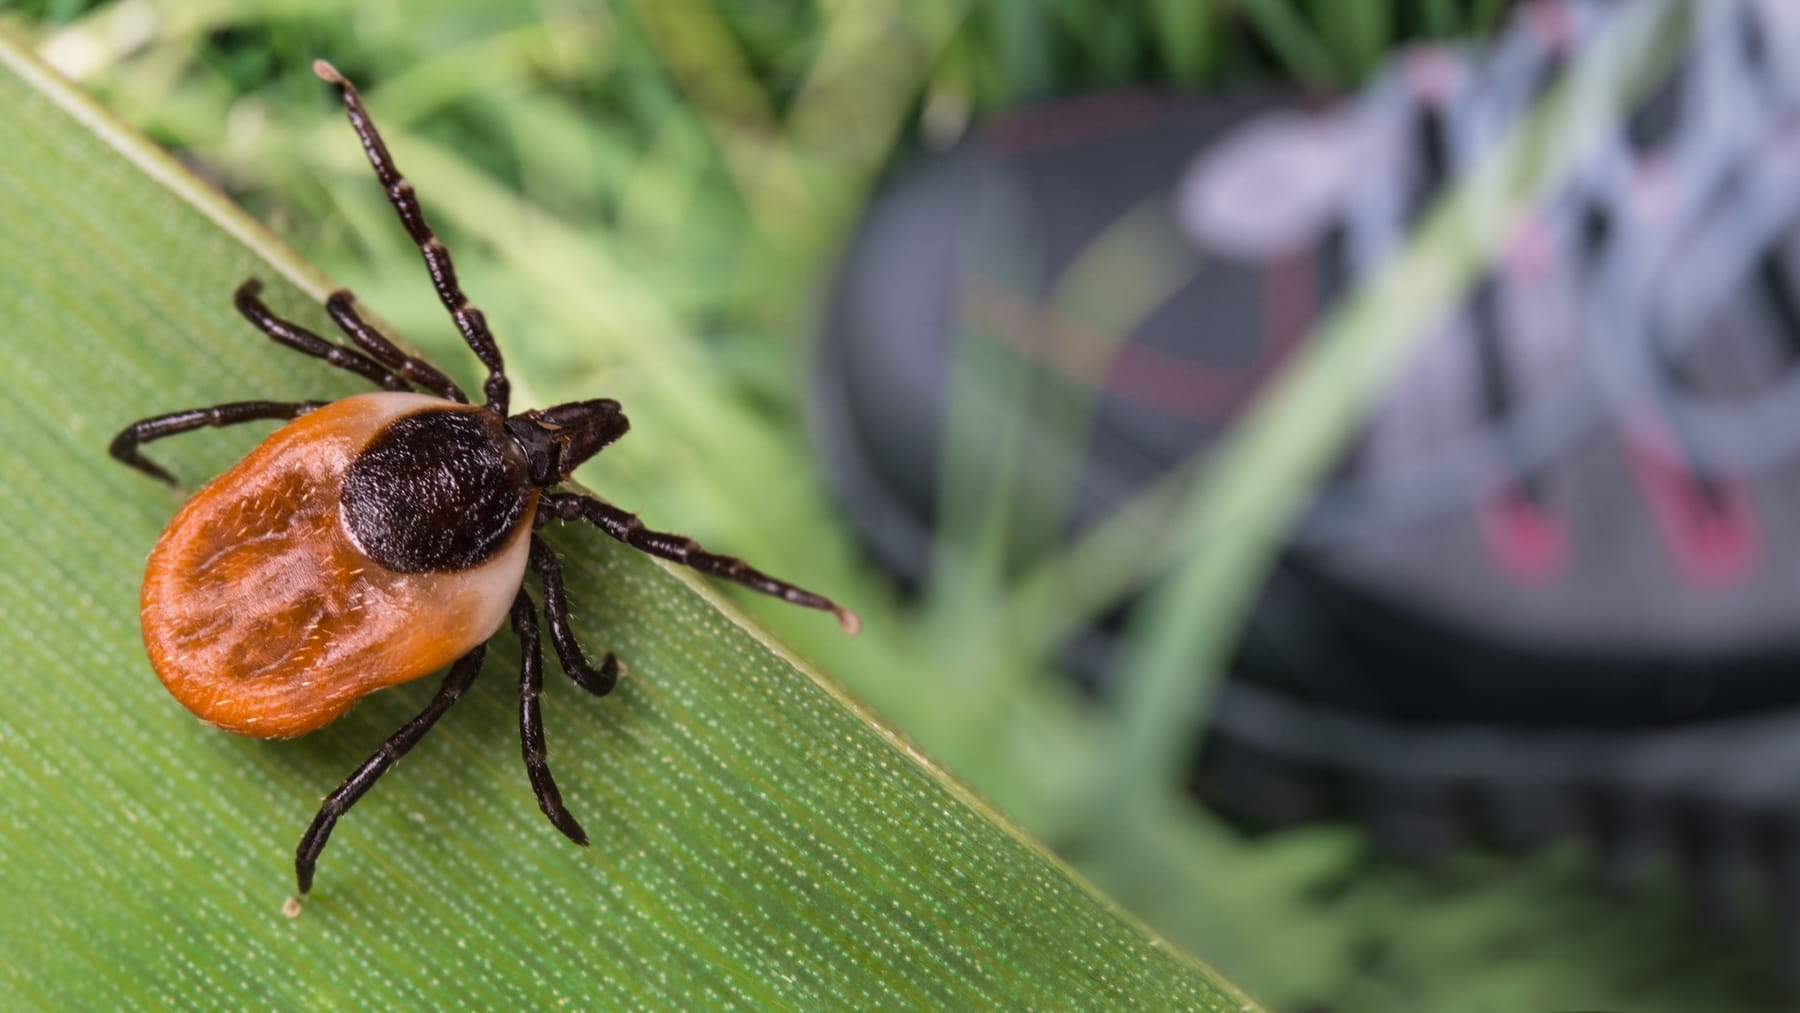 Ticks “fly” to people: these hidden forces are at work